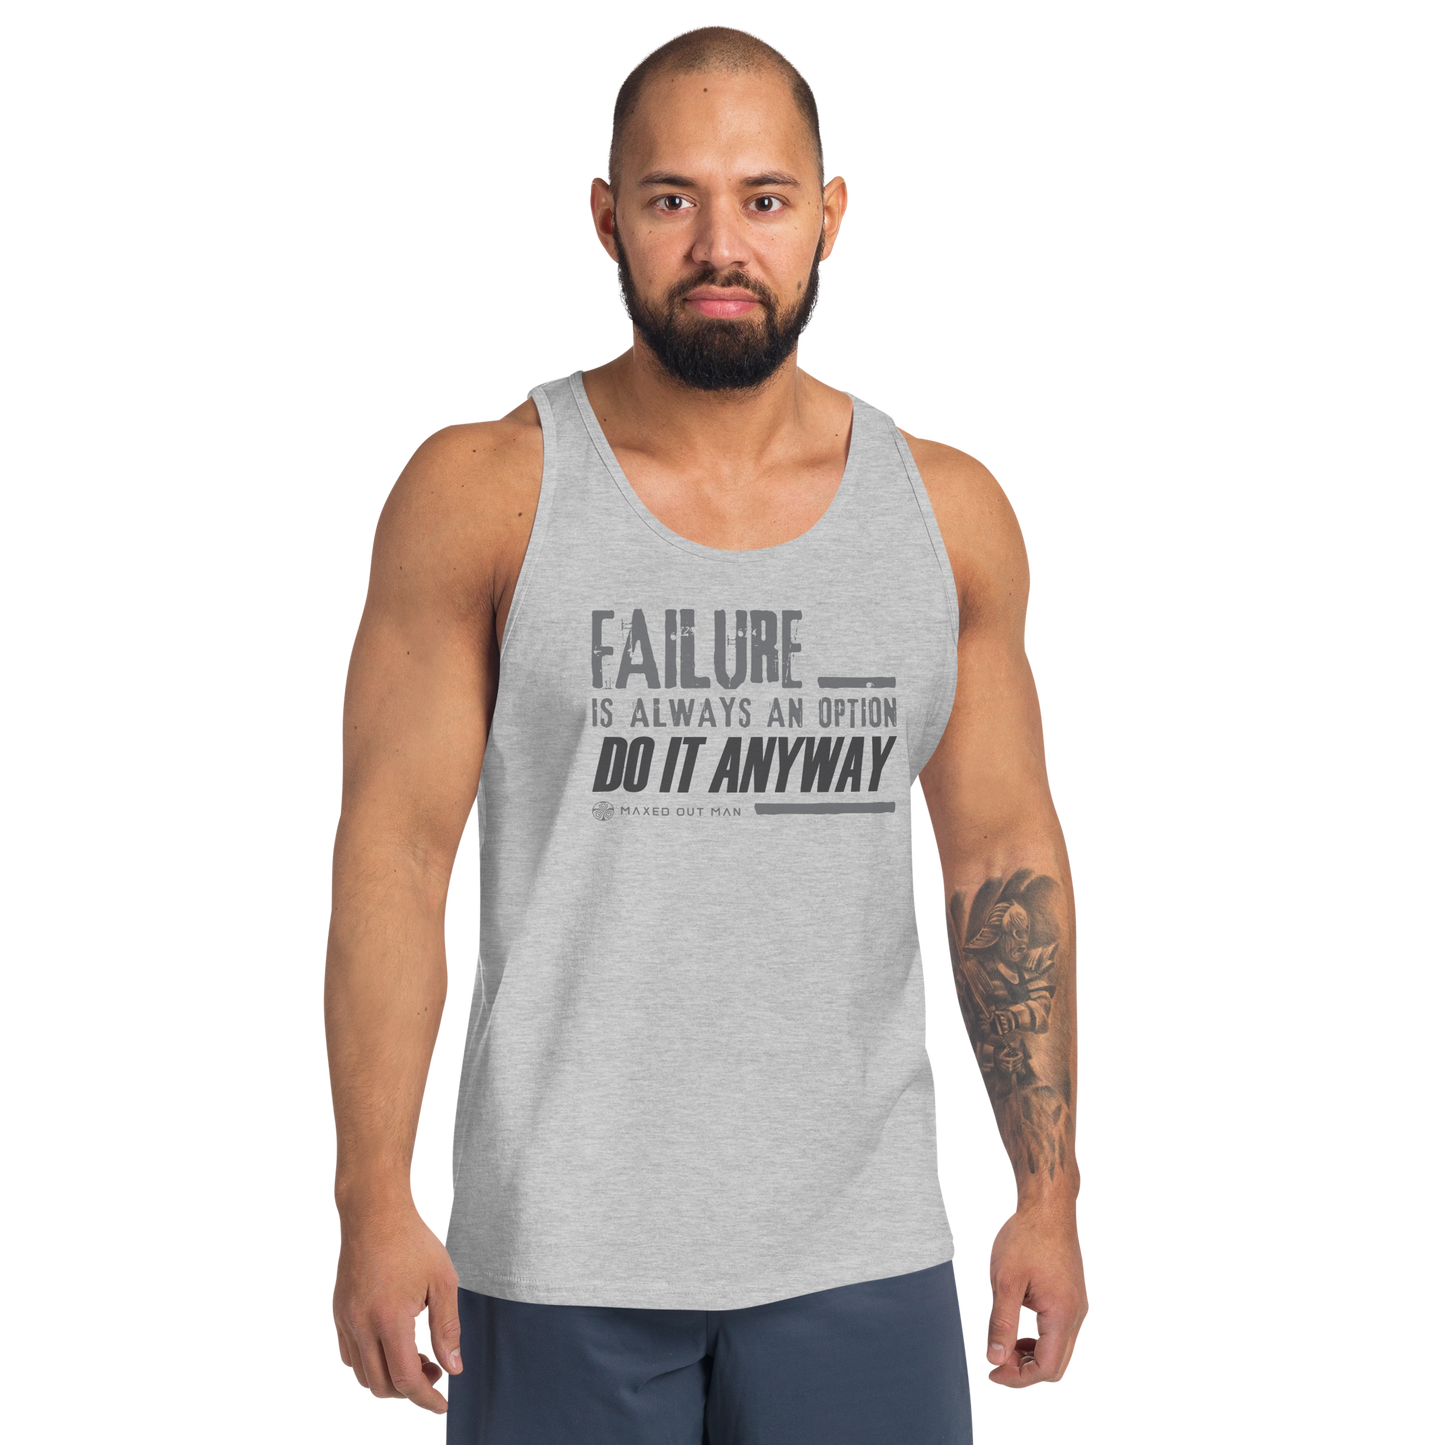 Failure is Always an Option Tank Top - Lighter Colors